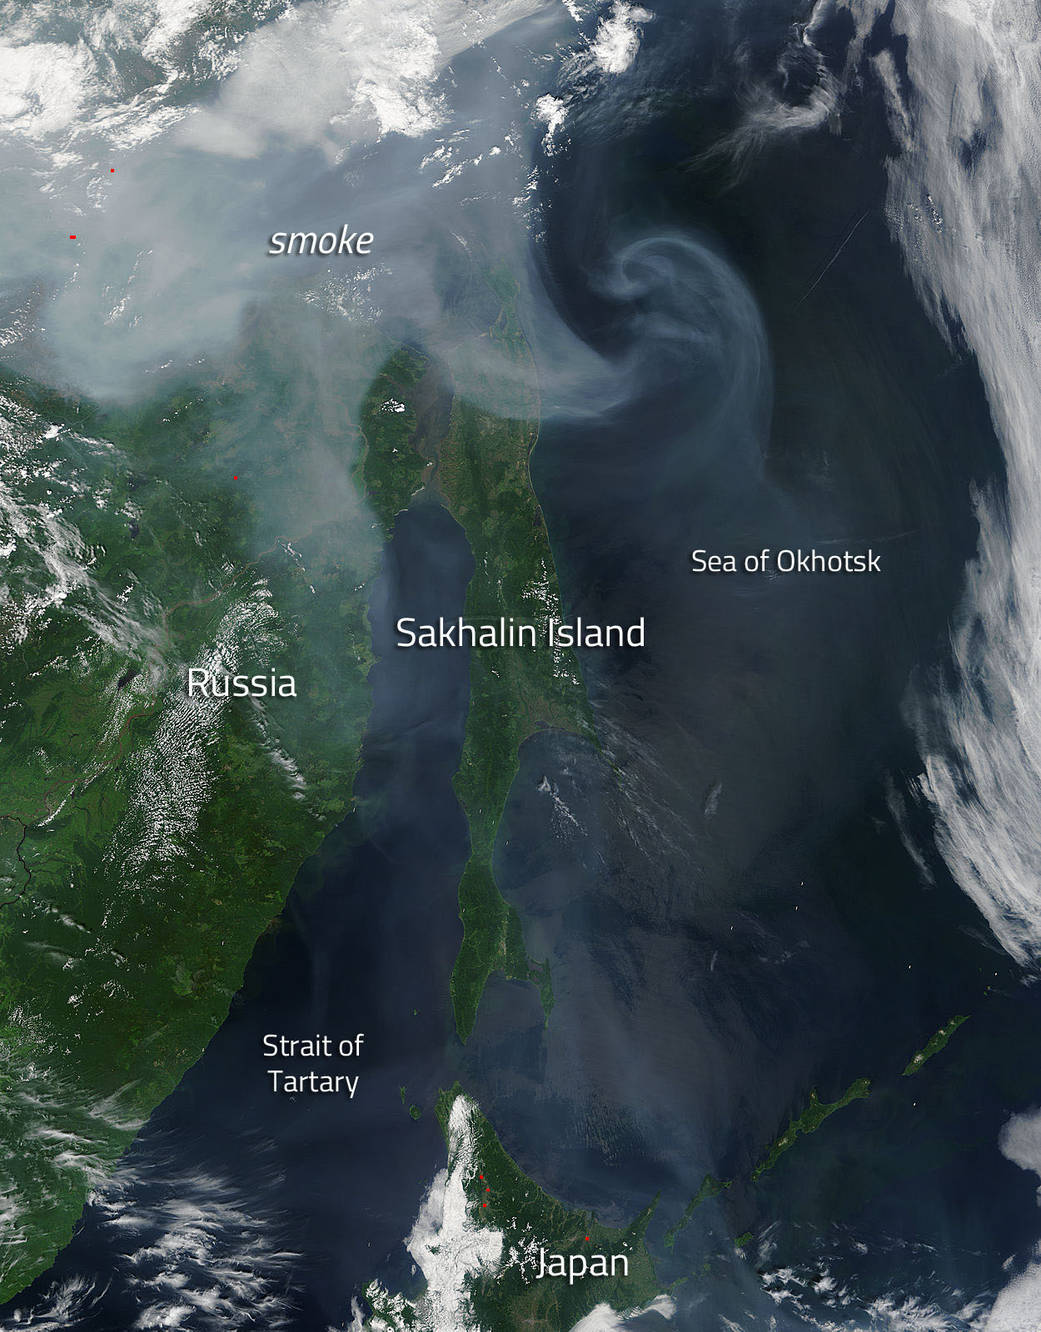 Smoke over the Sea of Okhotsk and parts of Russia